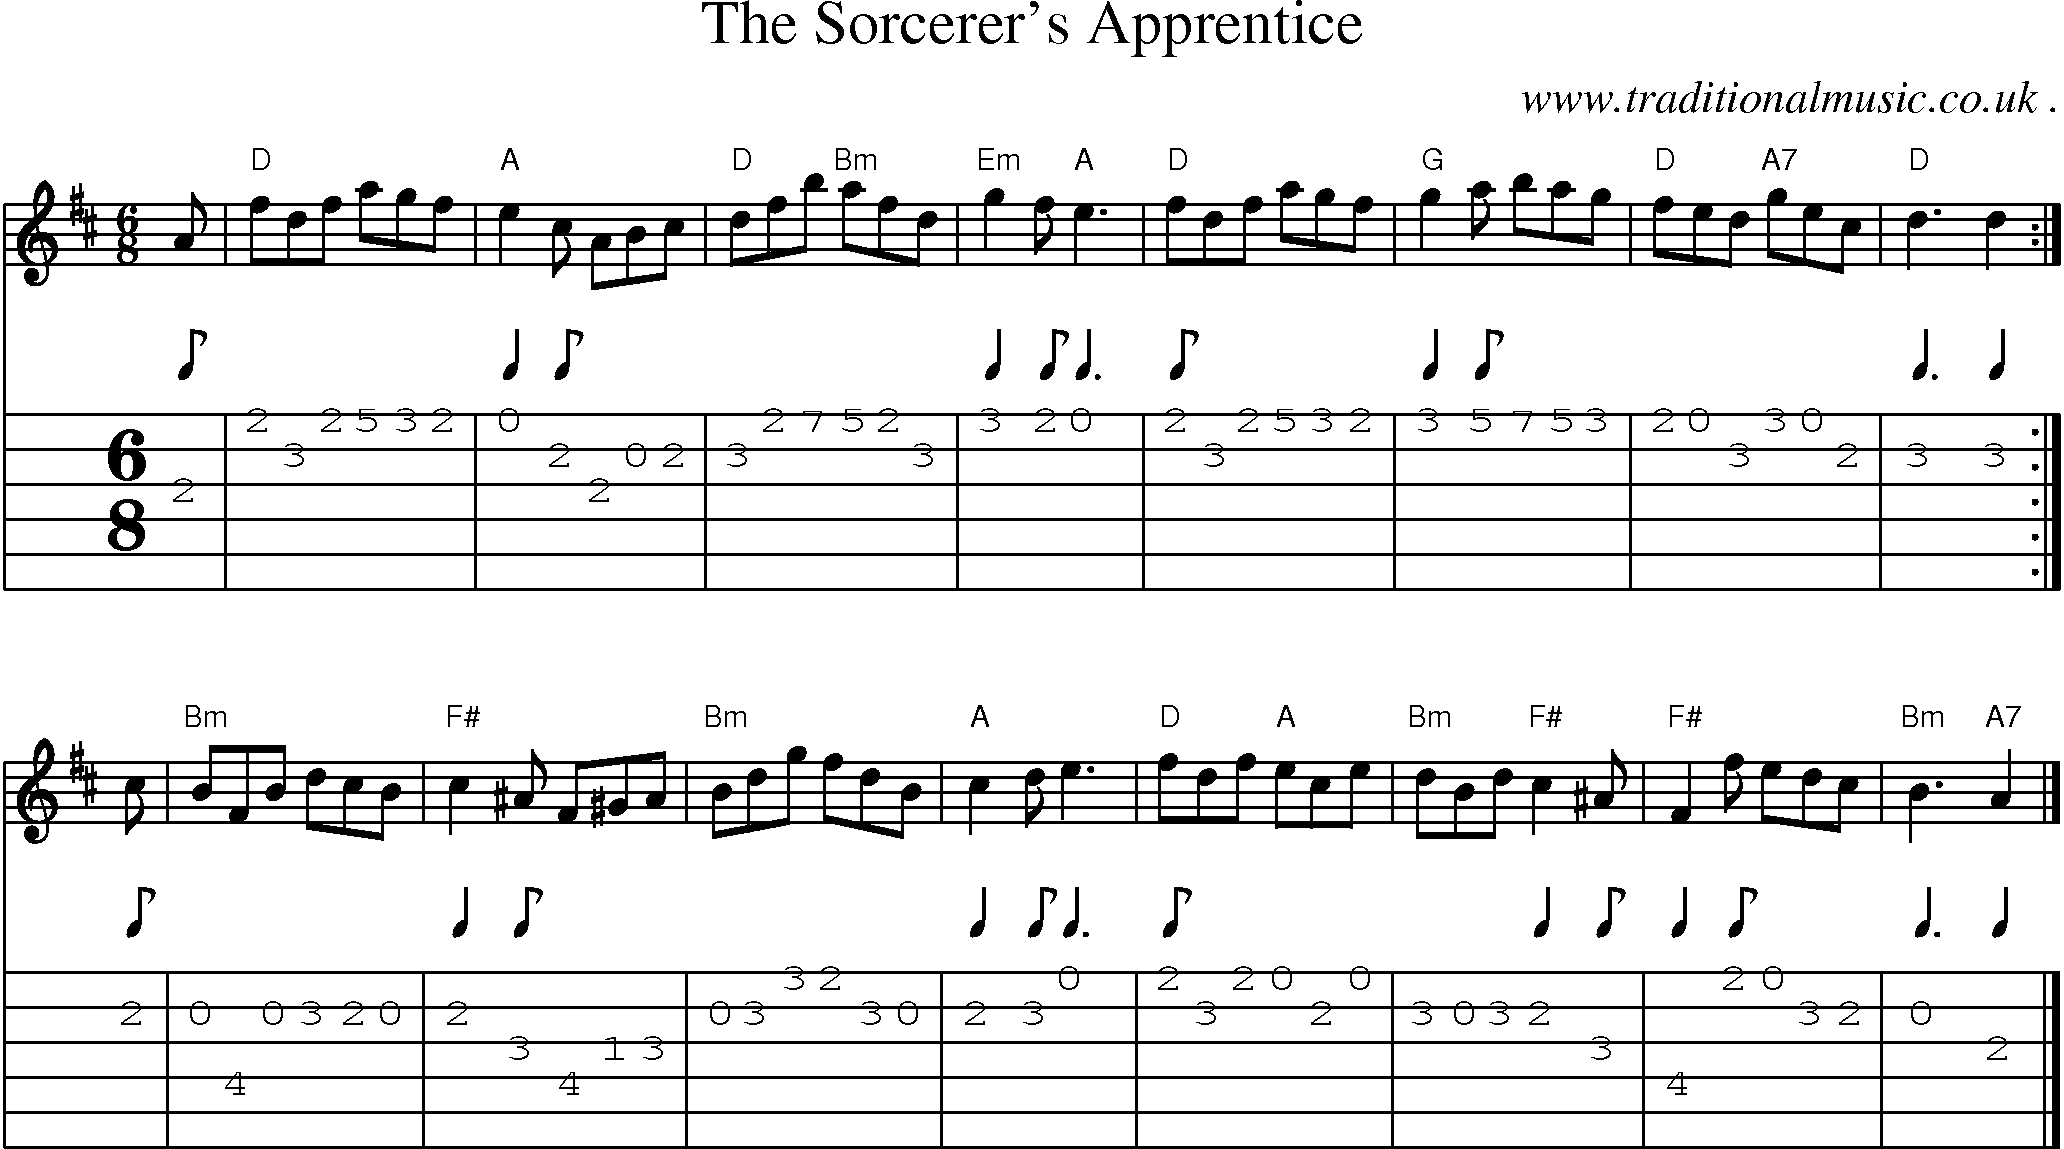 Sheet-music  score, Chords and Guitar Tabs for The Sorcerers Apprentice